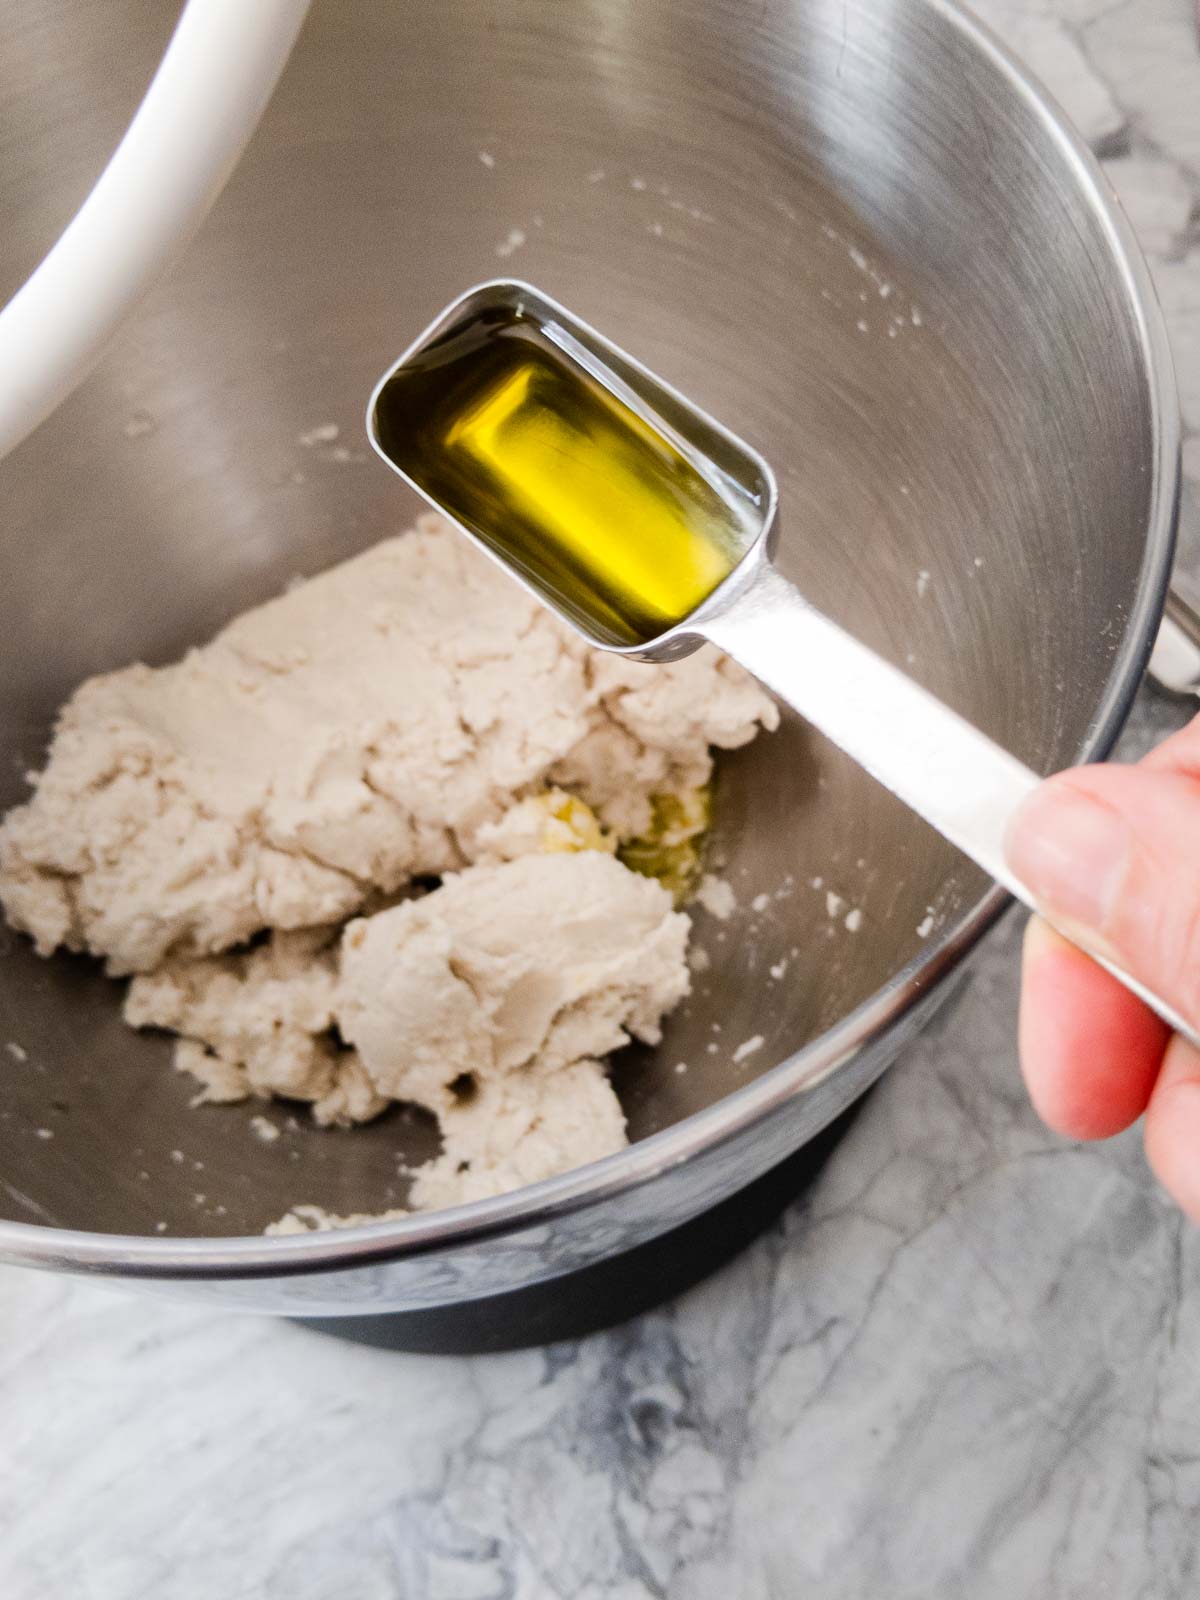 adding olive oil to dough